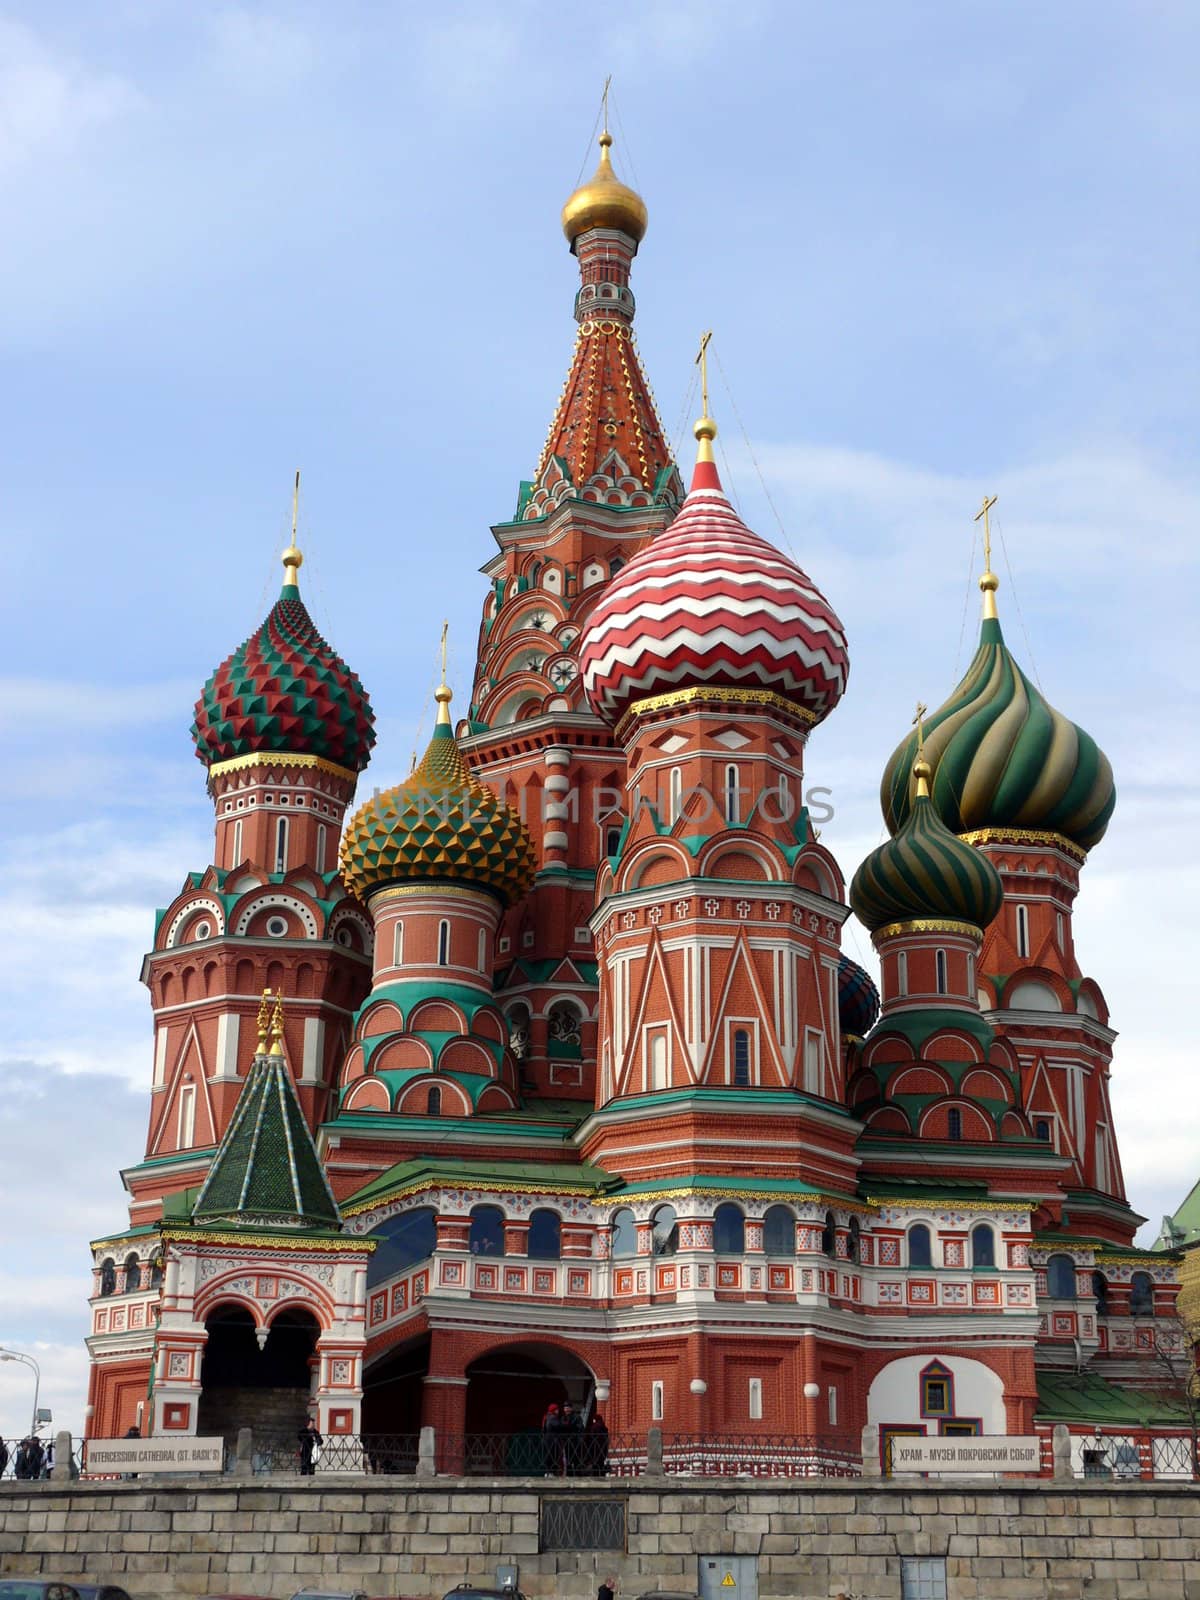 Saint Basil's Cathedral in Moscow, Russia by Stoyanov